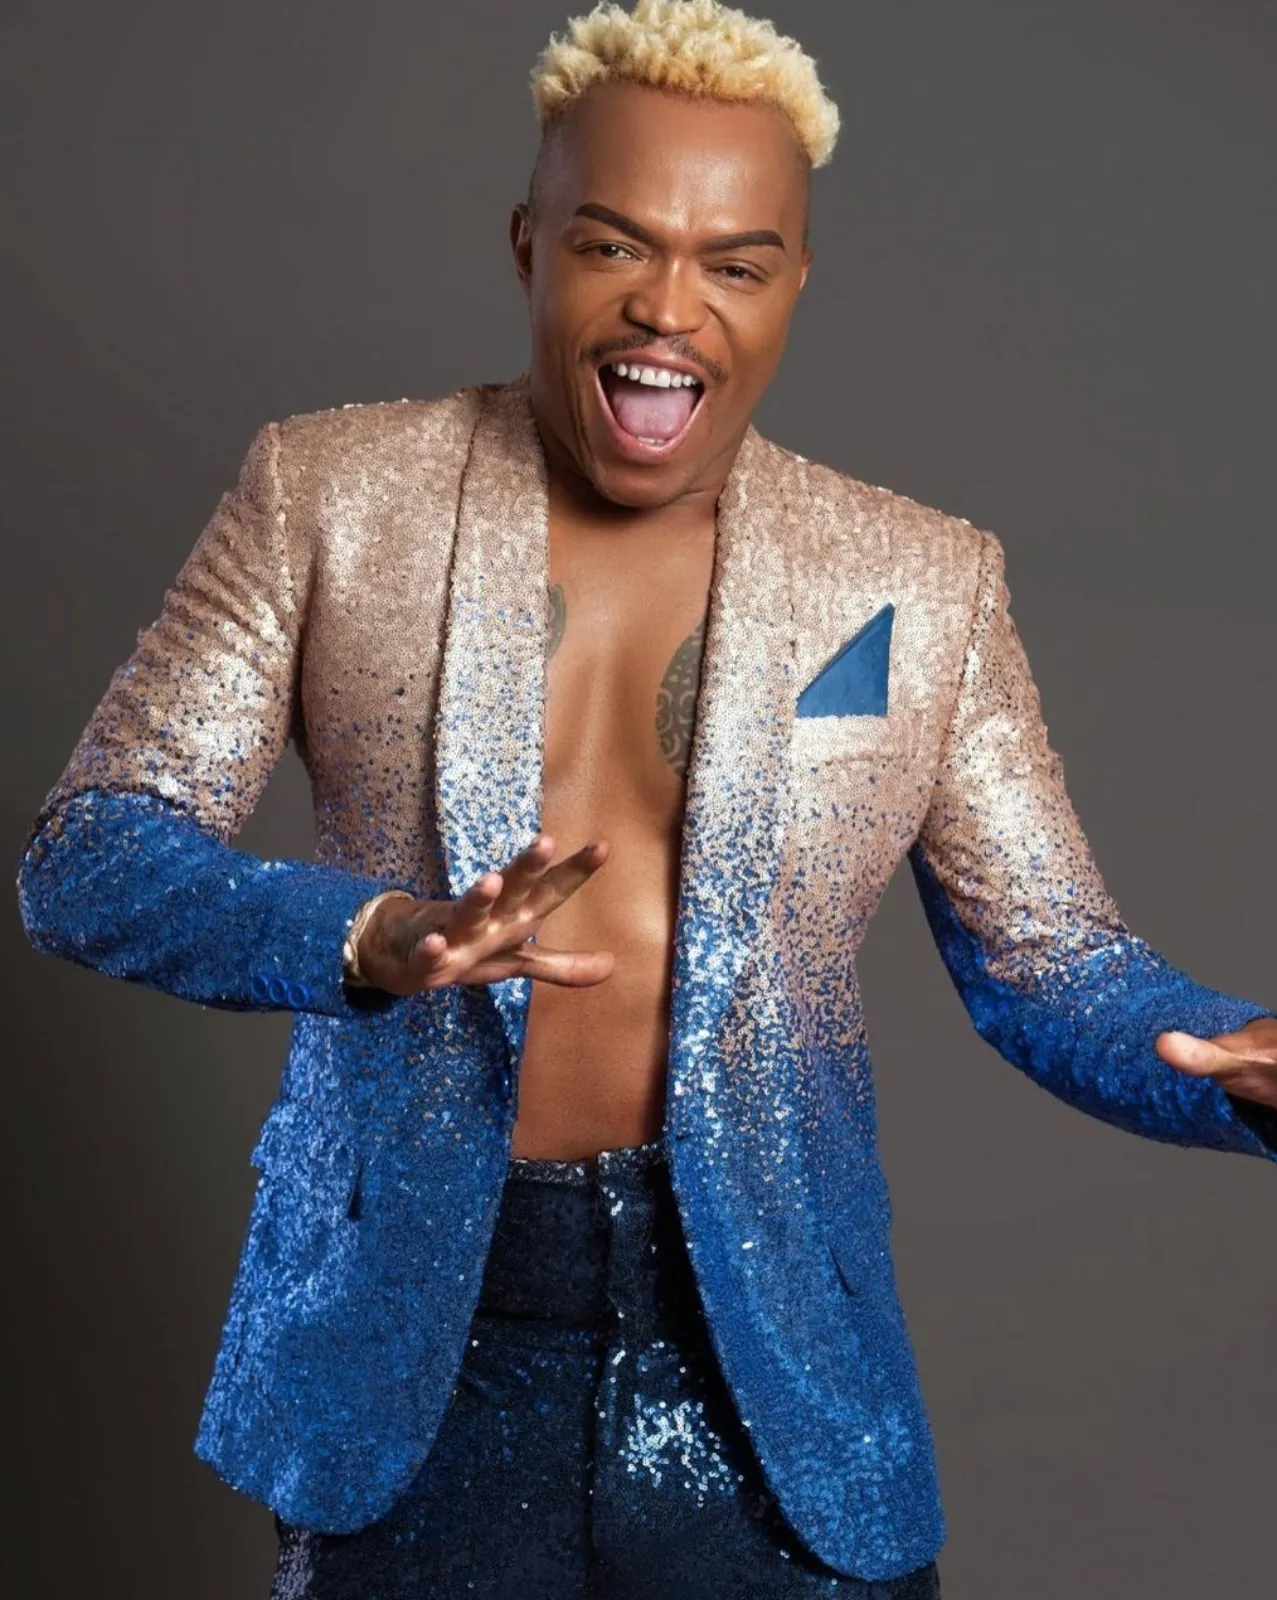 Somizi Speaks About His Return To Metro FM -“I’m Like The ‘It Girl’ Who Just Arrived”